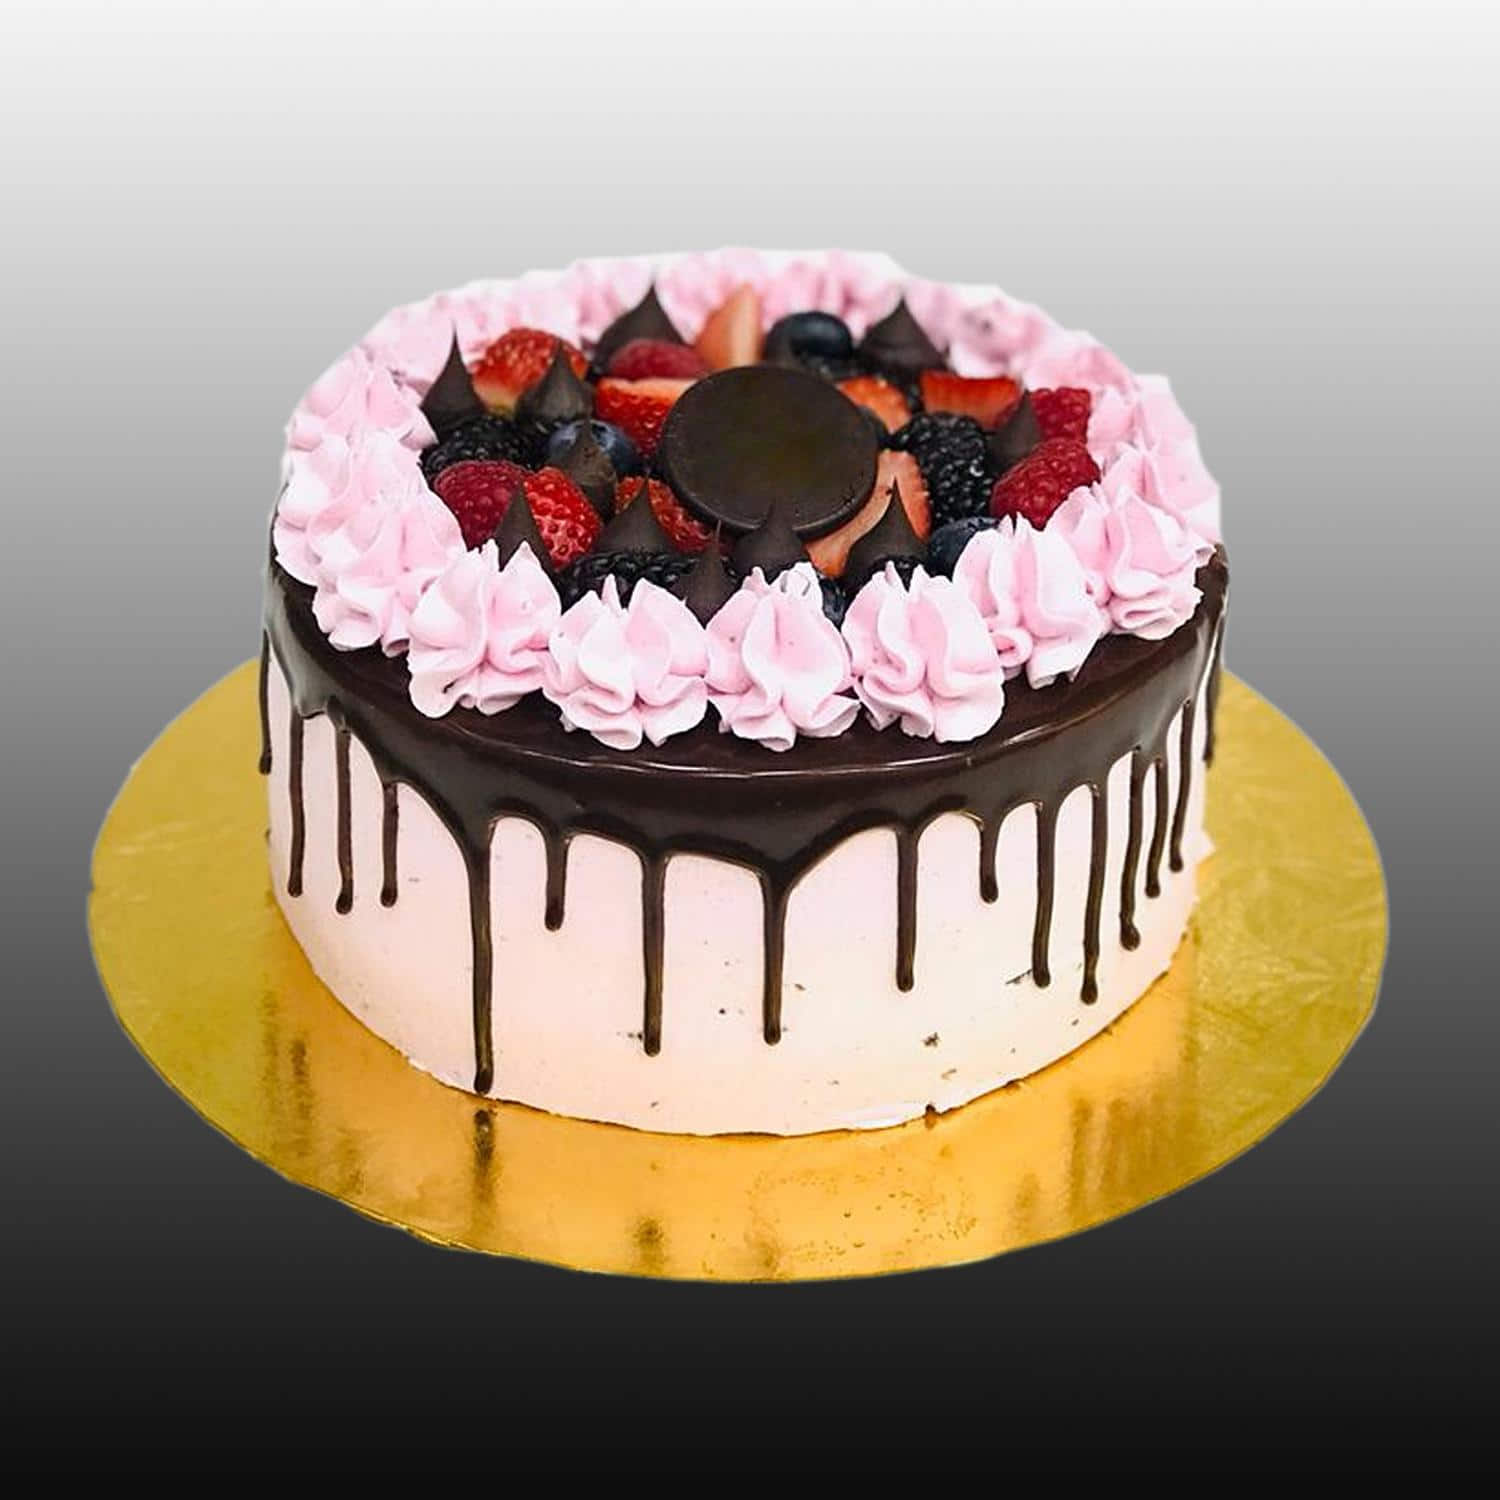 Send Cake And Gifts Anytime - Family - Nigeria